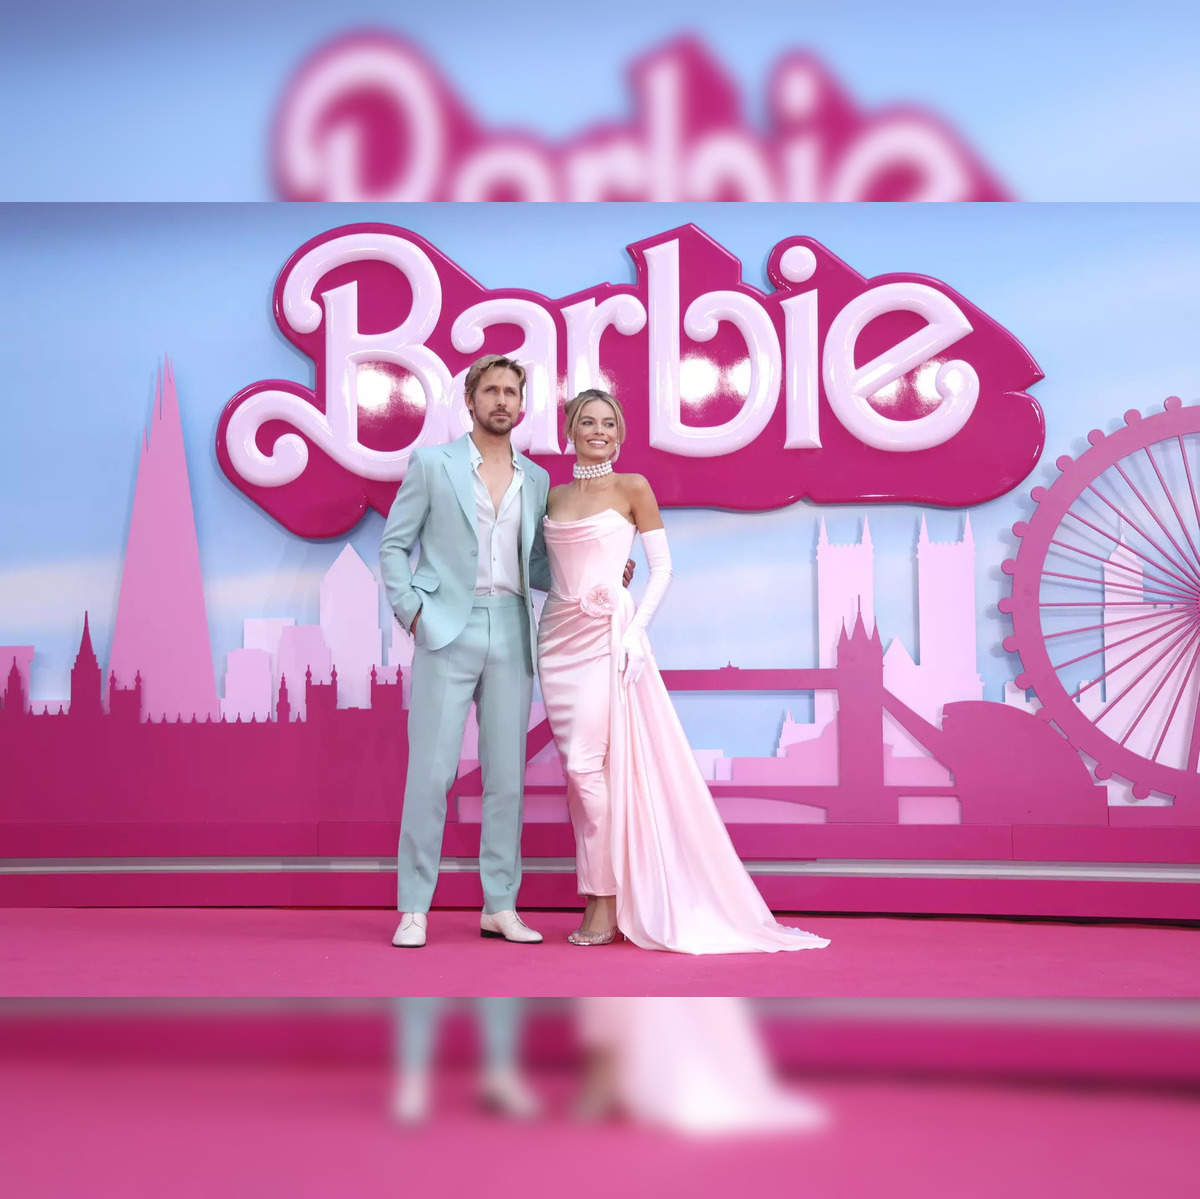 Margot Robbie And Ryan Gosling Are Bringing “Barbie” to the Big Screen -  The New York Times